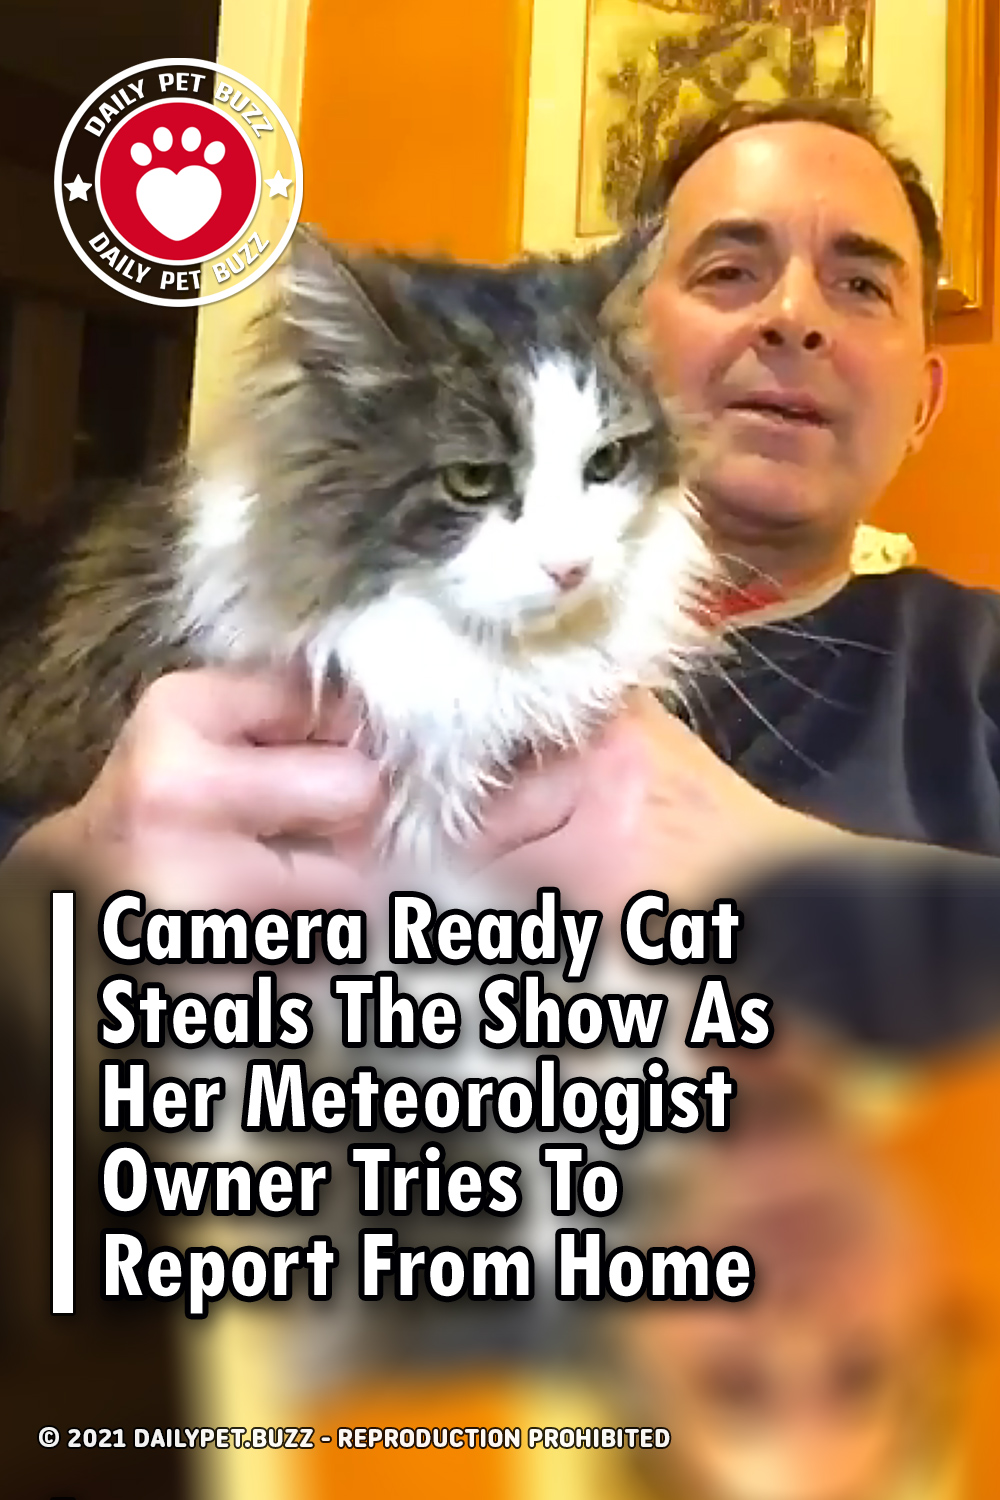 Camera Ready Cat Steals The Show As Her Meteorologist Owner Tries To Report From Home